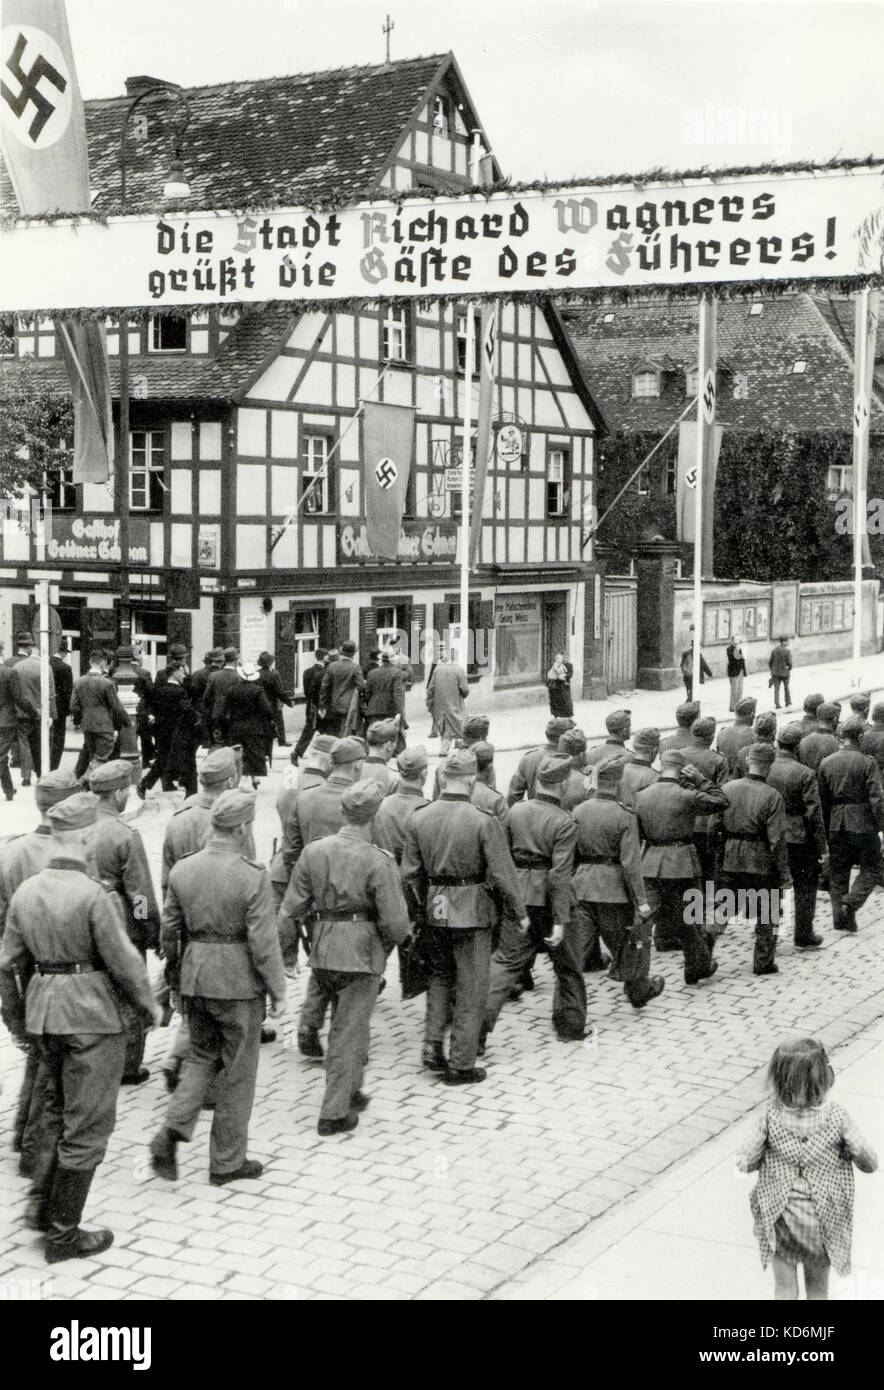 Bayreuth under Nazi rule with soldiers marching through it and swastikas on display 'Die stadt Richard Wagners geust die gafte des fuhrers', Wagner related. Stock Photo